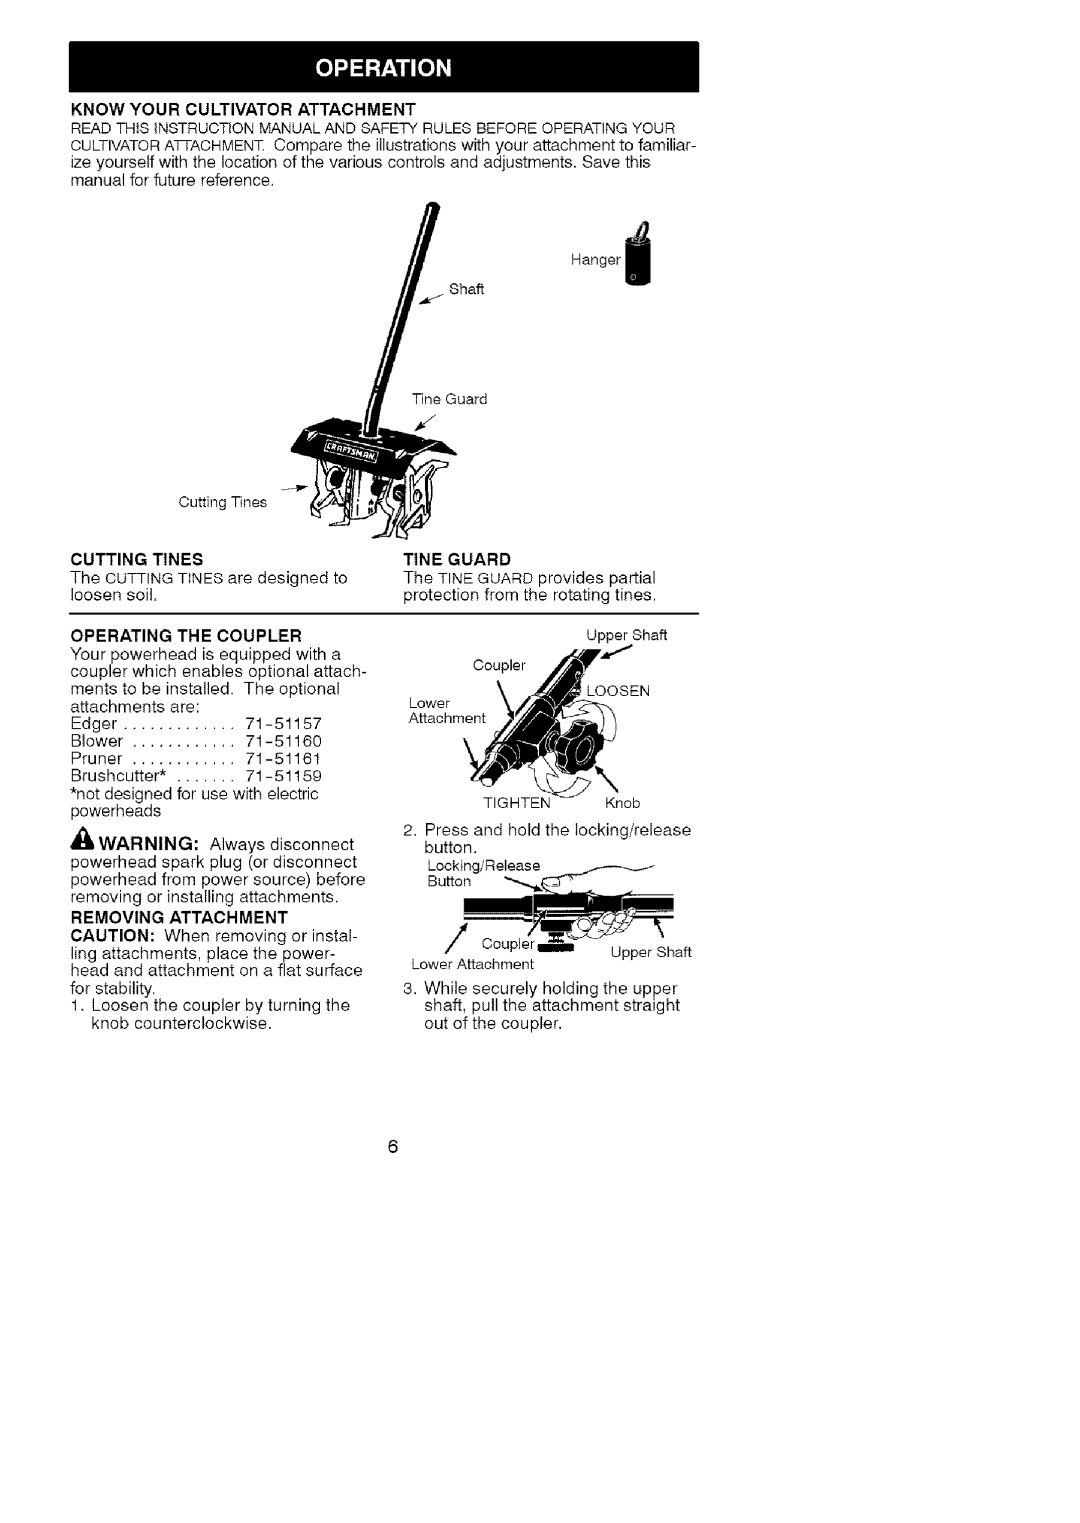 Craftsman C944.511580 Know Your Cultivator Attachment, Operating The Coupler, Removing Attachment, Tine Guard 